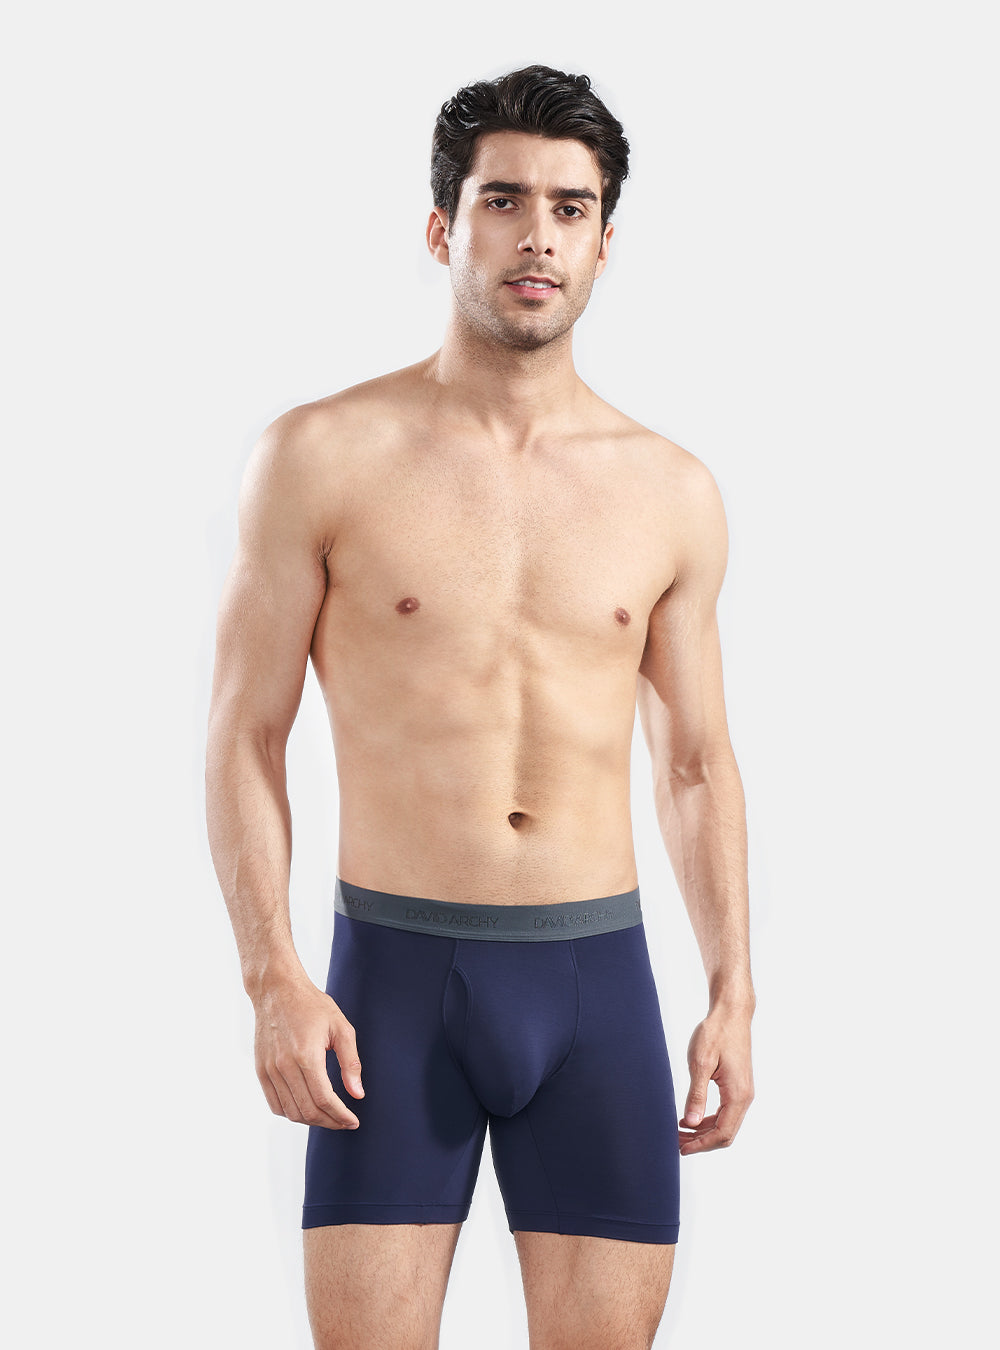 Buy STEP ONE Mens Boxers Underwear for Men, Moisture-Wicking Mens Boxer  Shorts, 3D Pouch + Chafe-Reducing Mens Boxers. Fabric Made from Bamboo  Trunks - Boxer Briefs Online at desertcartSeychelles